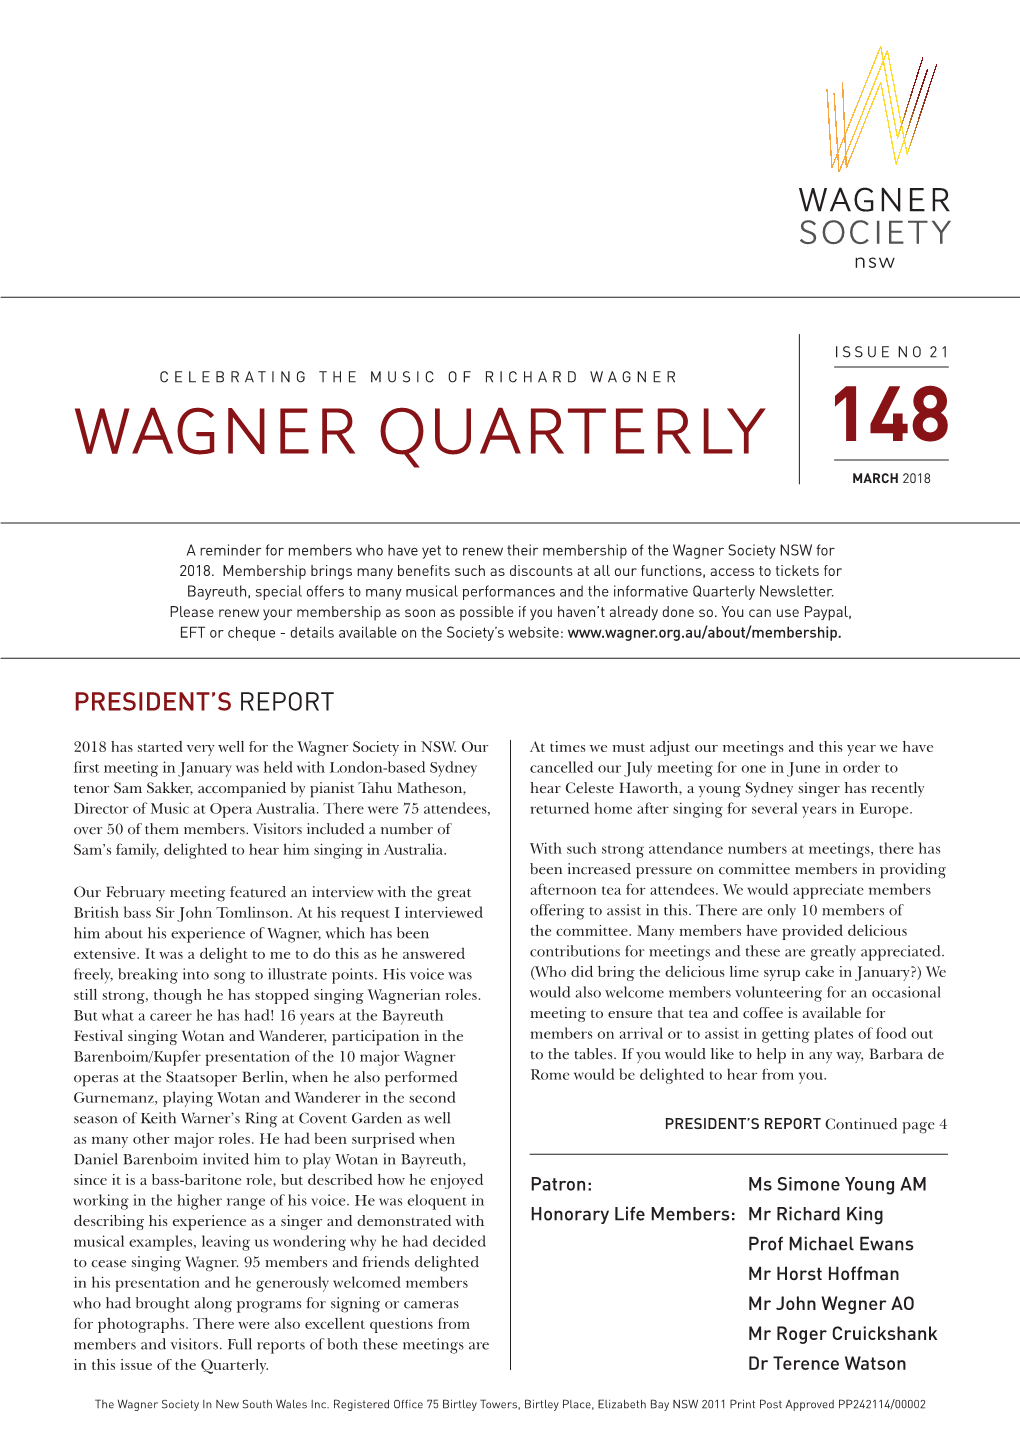 Wagner Quarterly 148 March 2018